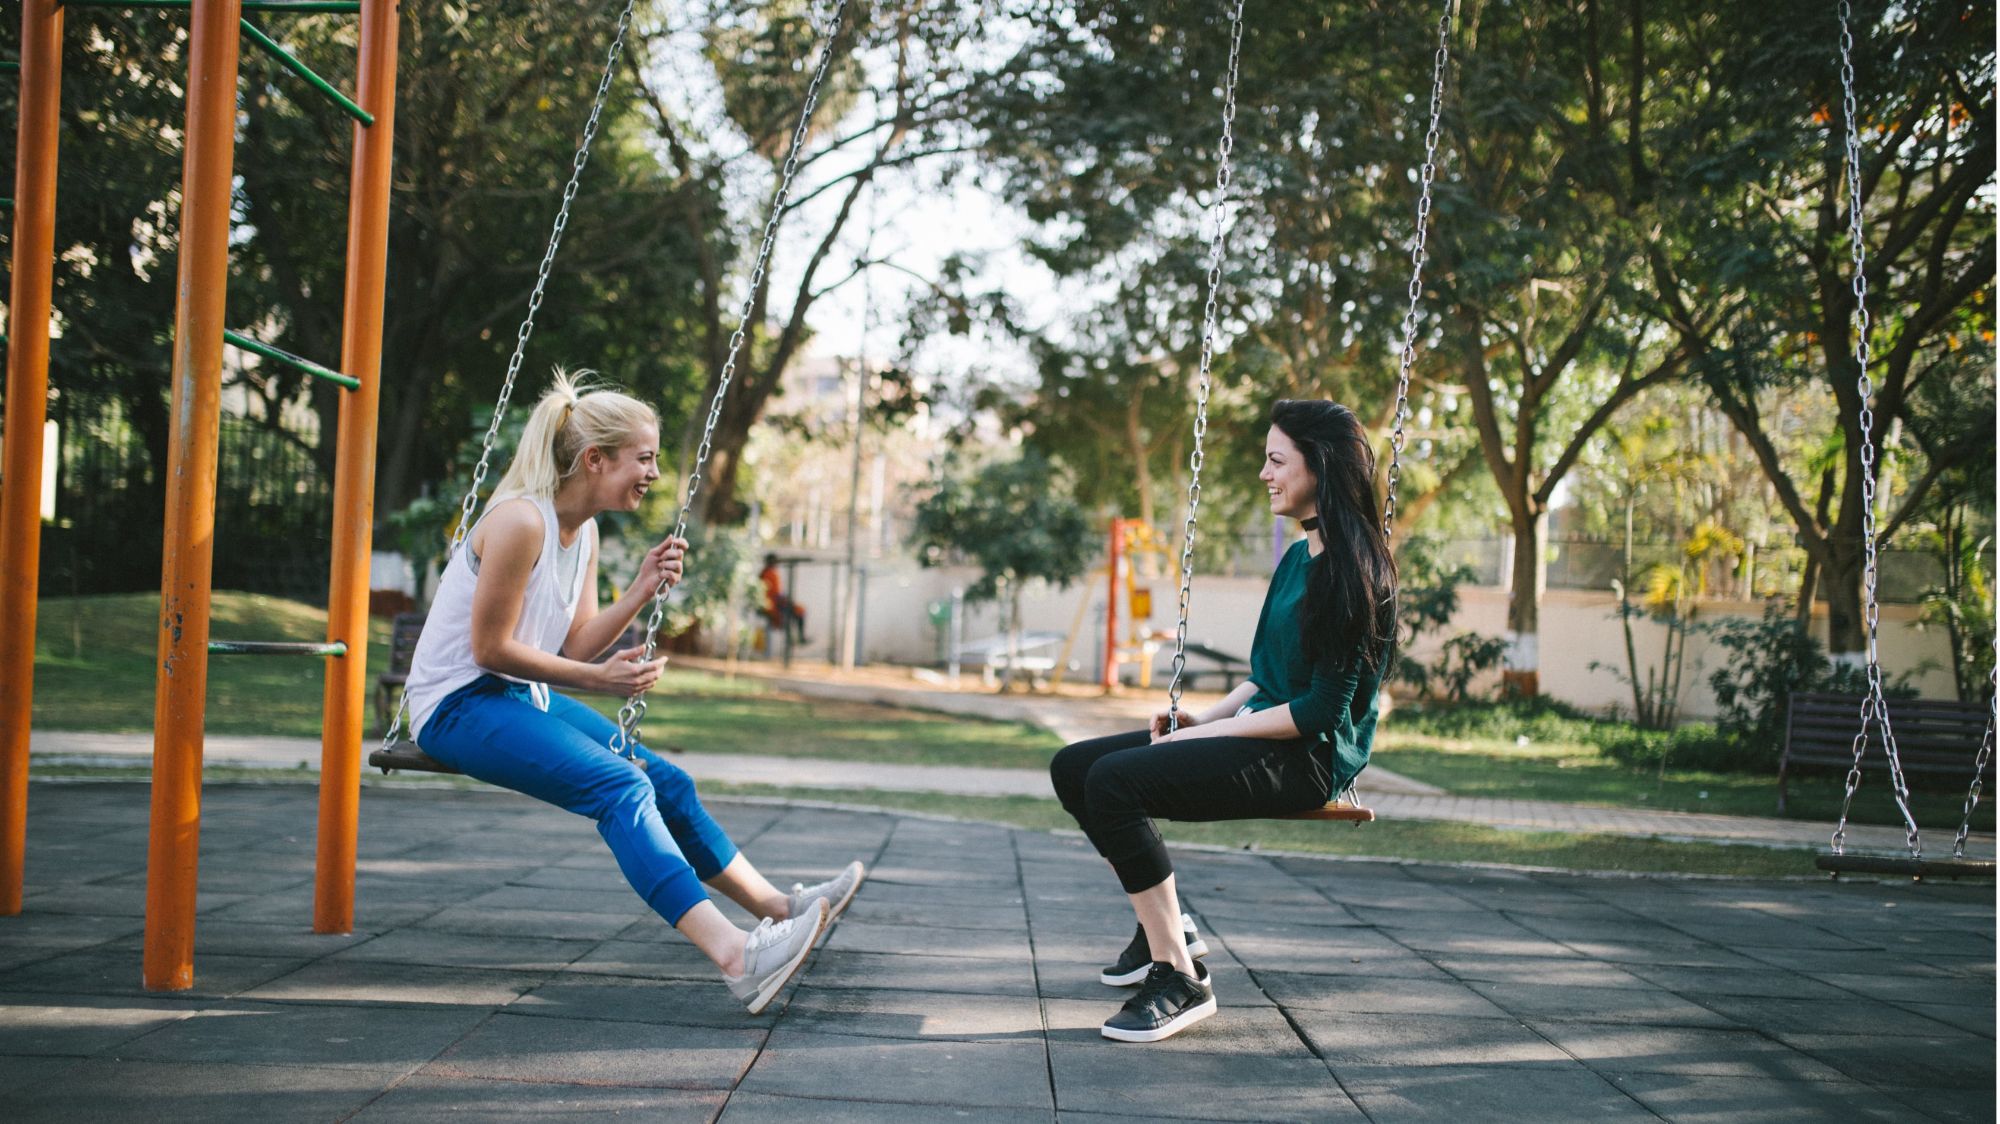 two teenage girls, sitting on swings in park, facing each other, smiling and conversing with one another with large trees, bench, and younger kid park in background.